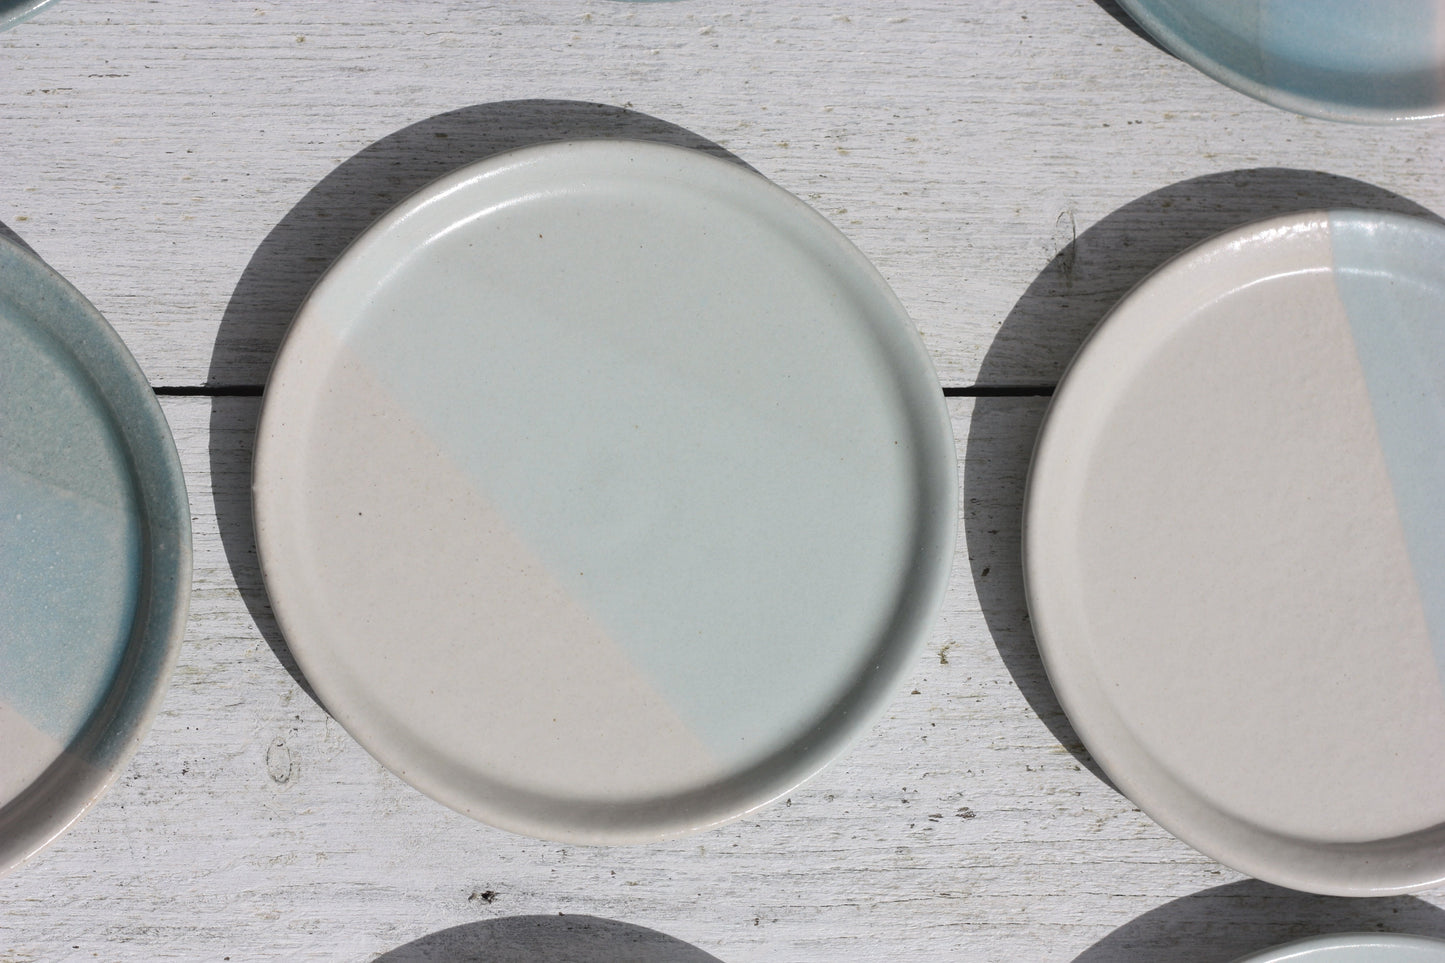 Small Plate, Candle Plate or Large Ceramic Coaster